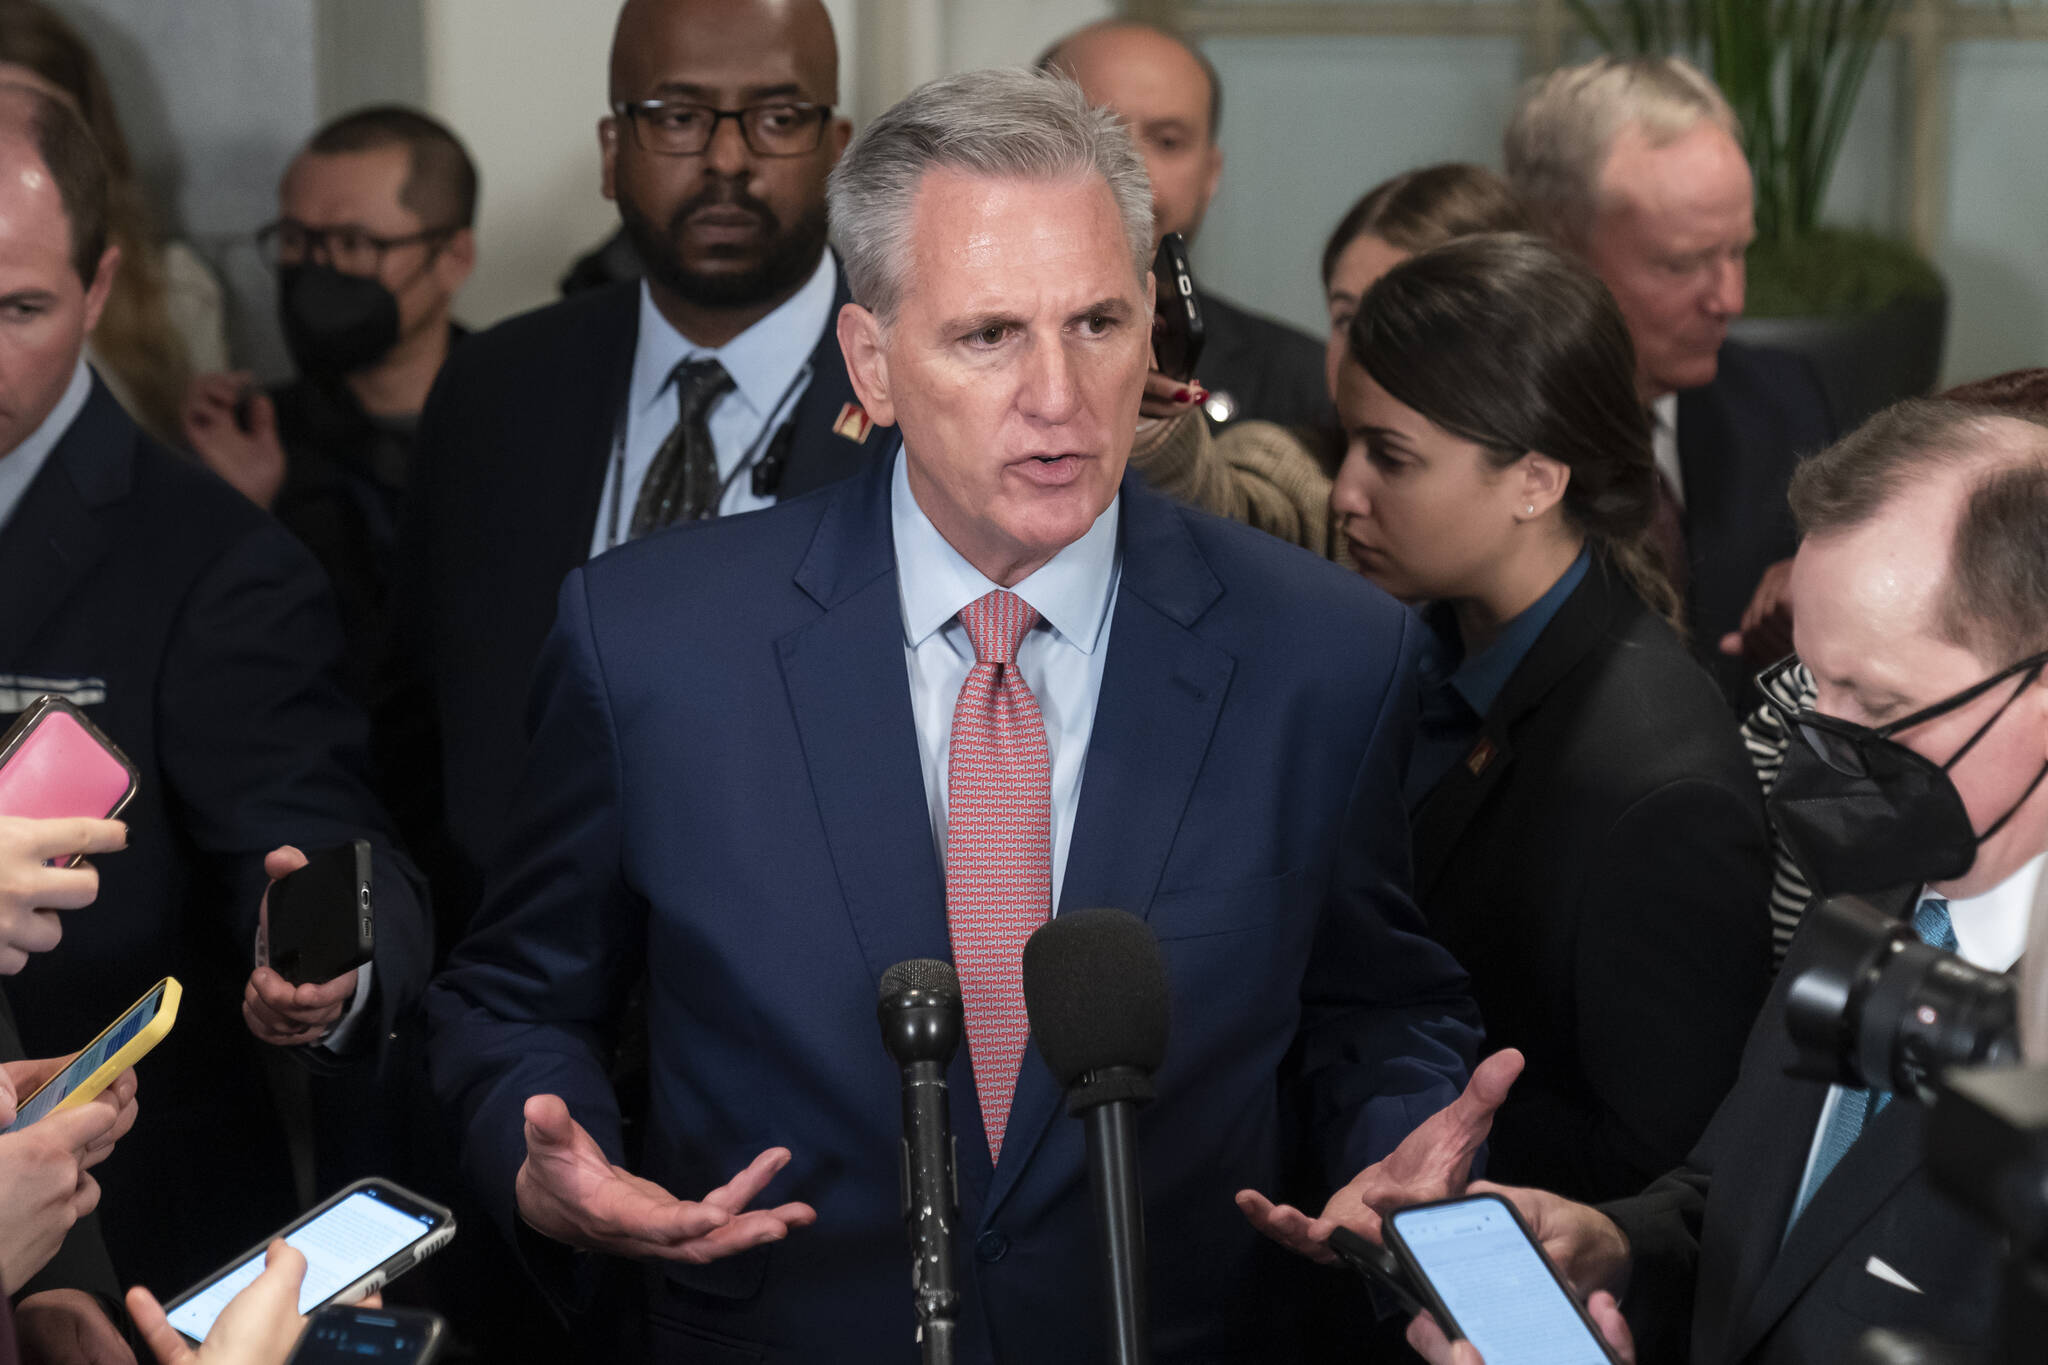 House Republican Leader Kevin McCarthy, R-Calif., speaks after a closed-door meeting with the GOP Conference as he pursues the speaker of the House role when as the 118th Congress convenes, Tuesday, Jan. 3, 2023, in Washington. (AP Photo / Alex Brandon)